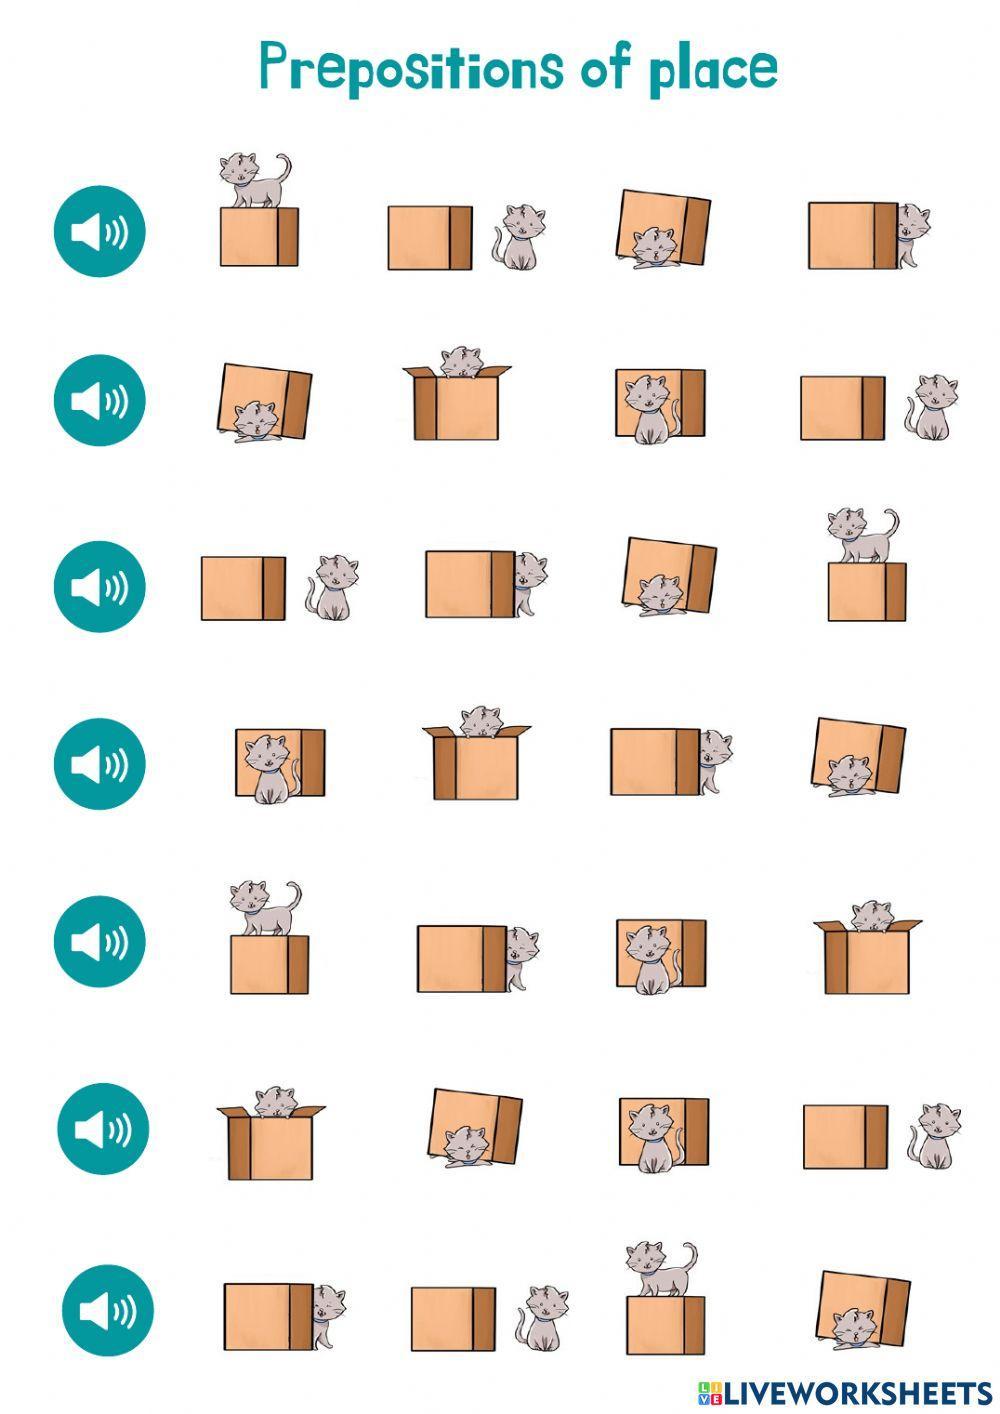 prepositions of place liveworksheets